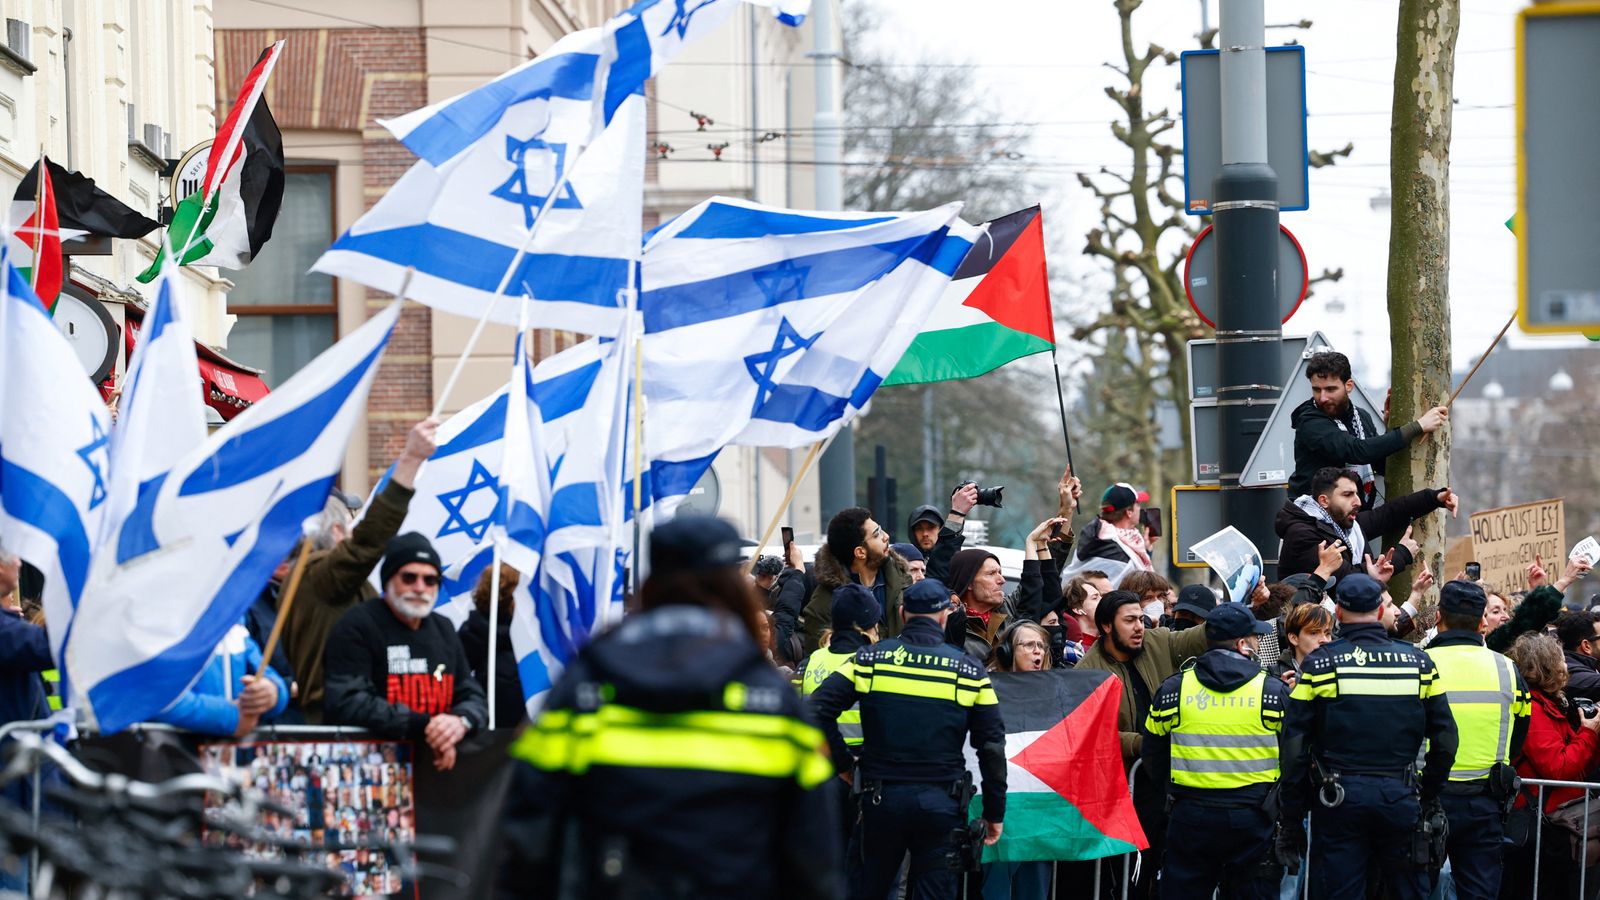 Protests outside Holocaust museum as Israeli president visits Amsterdam